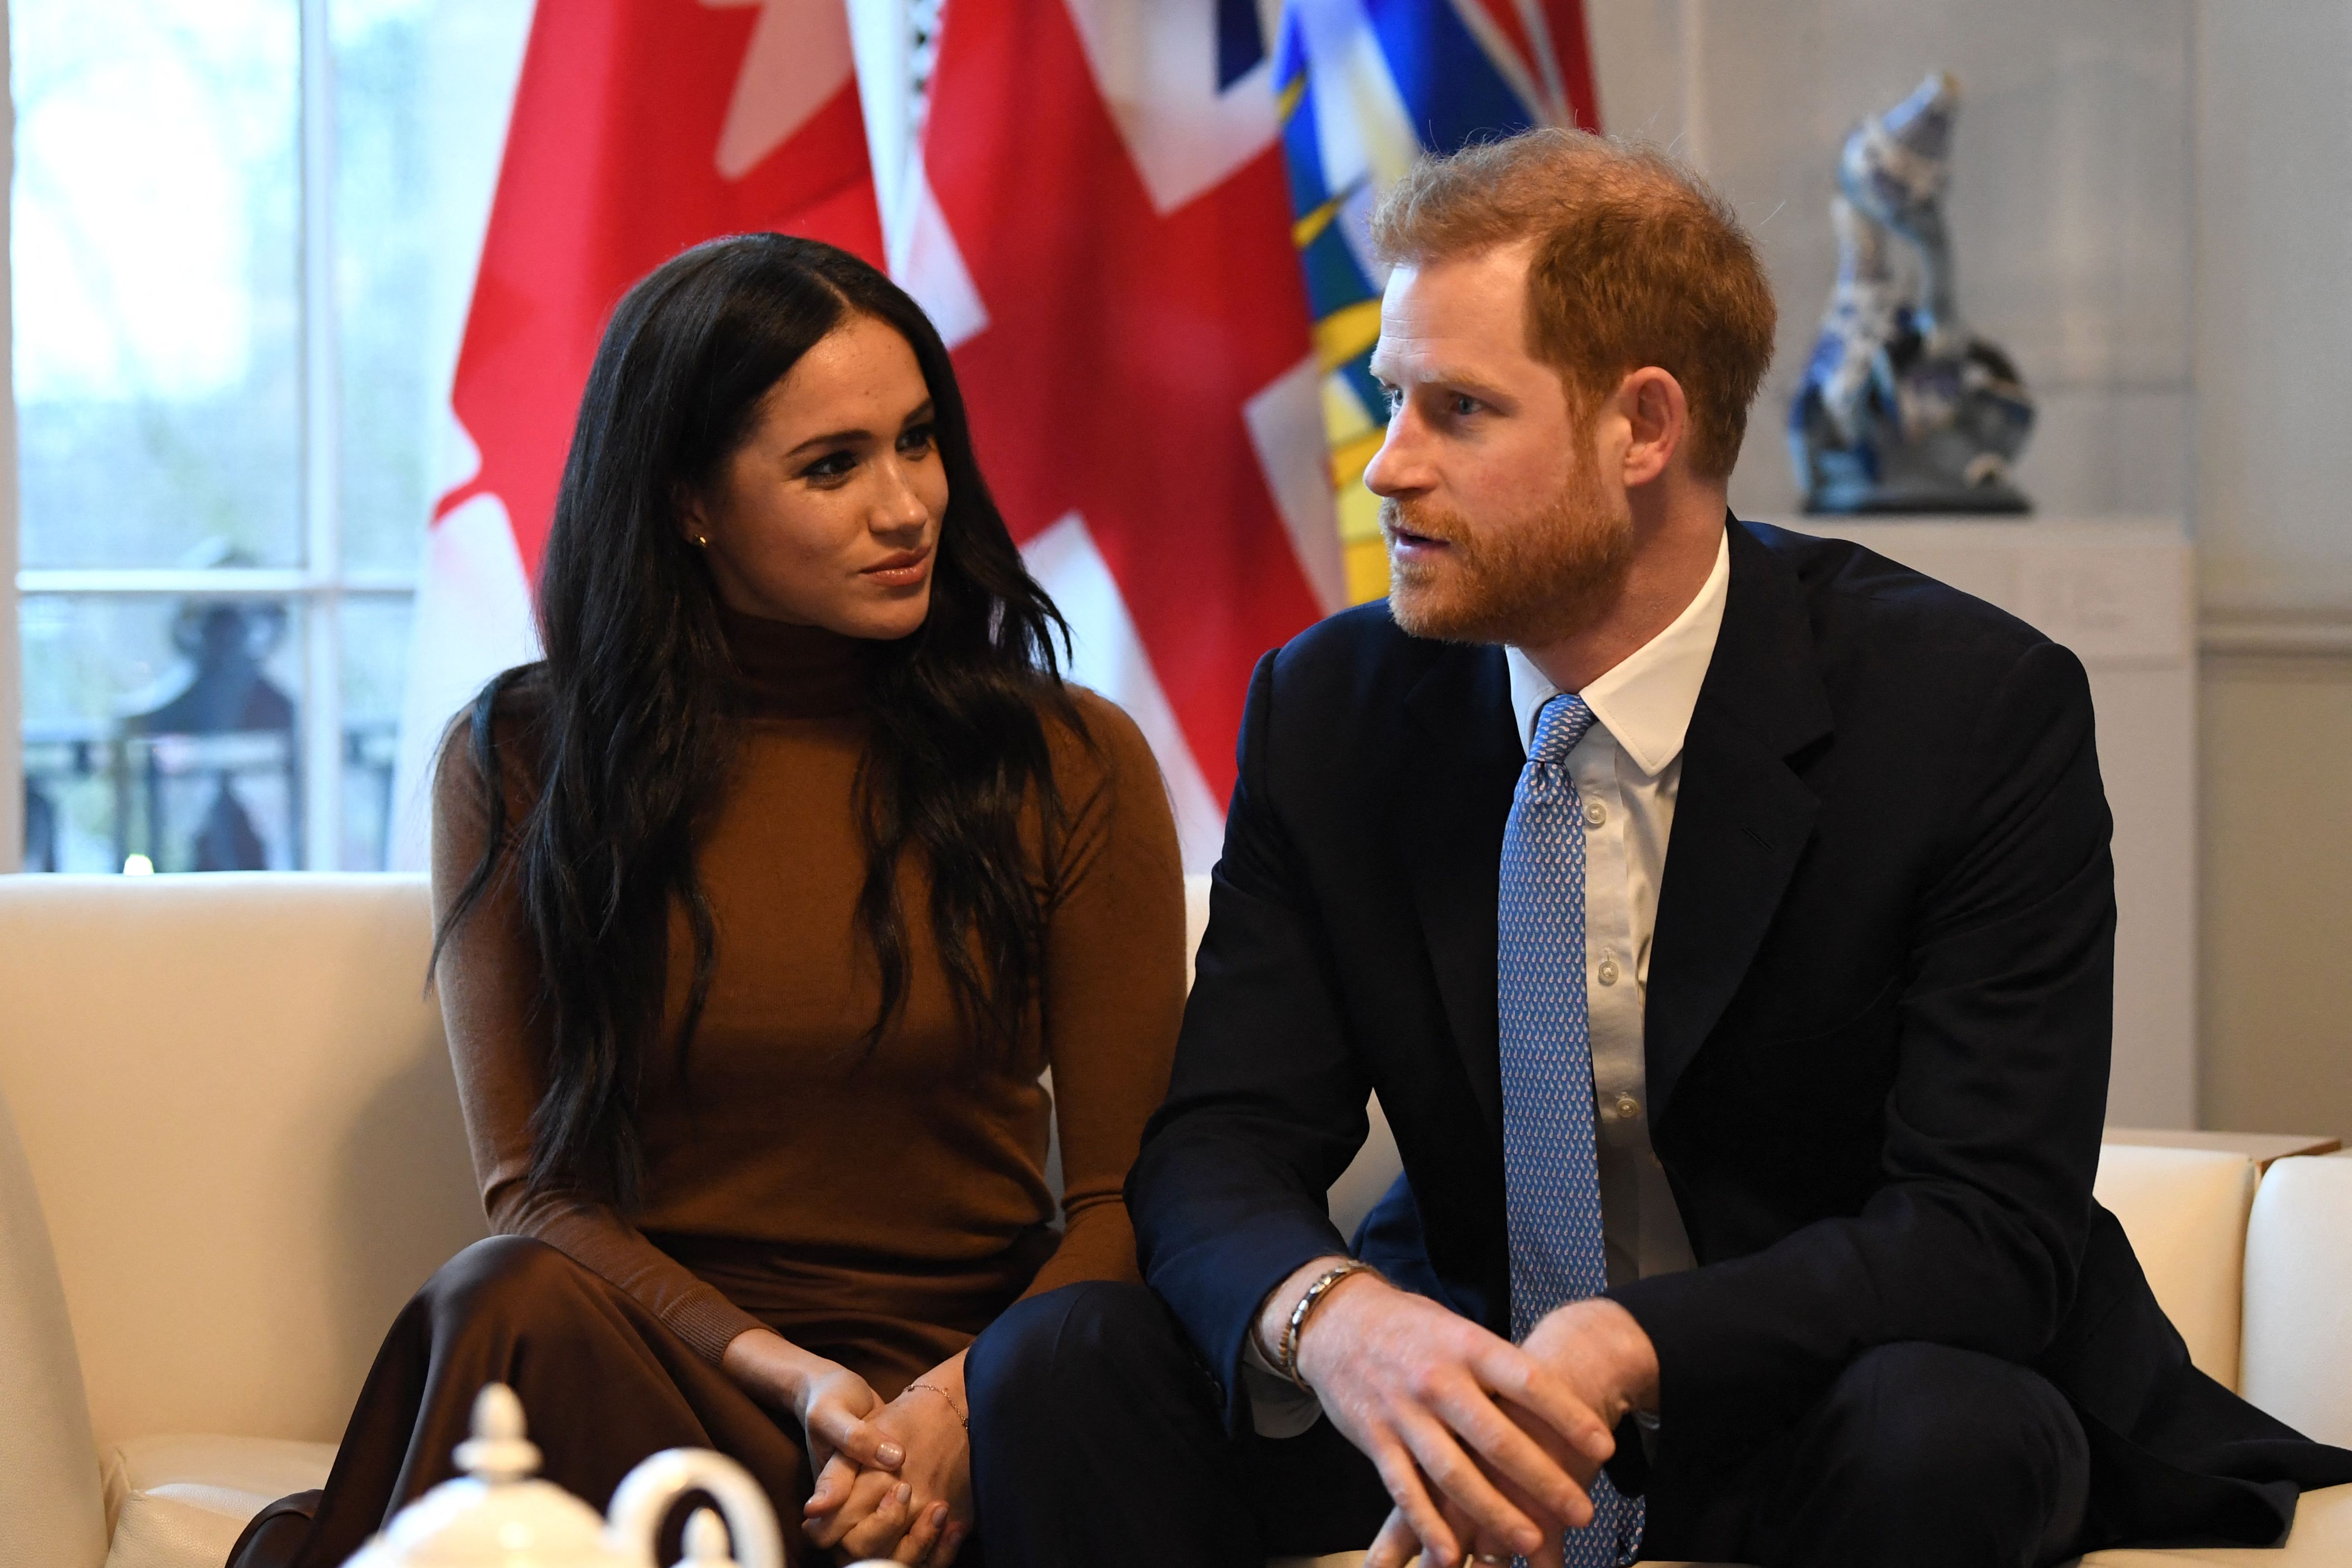 Britain's Prince Harry, Duke of Sussex and Meghan, Duchess of Sussex gesture during their visit to Canada House in thanks for the warm Canadian hospitality and support they received during their recent stay in Canada, in London on January 7, 2020.  | Source: Getty Images